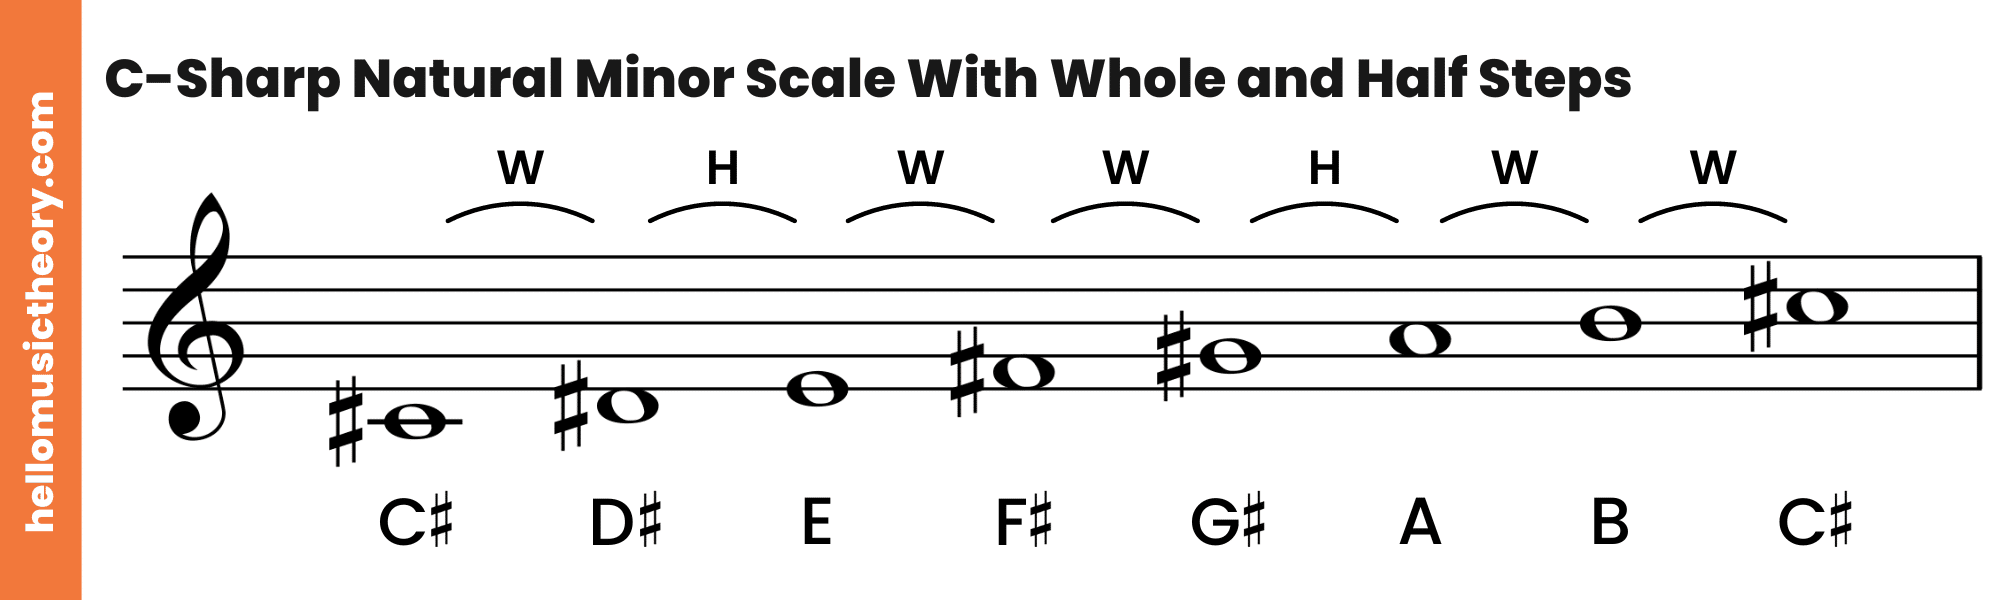 C-Sharp Natural Minor Scale Treble Clef Ascending With Whole and Half Steps